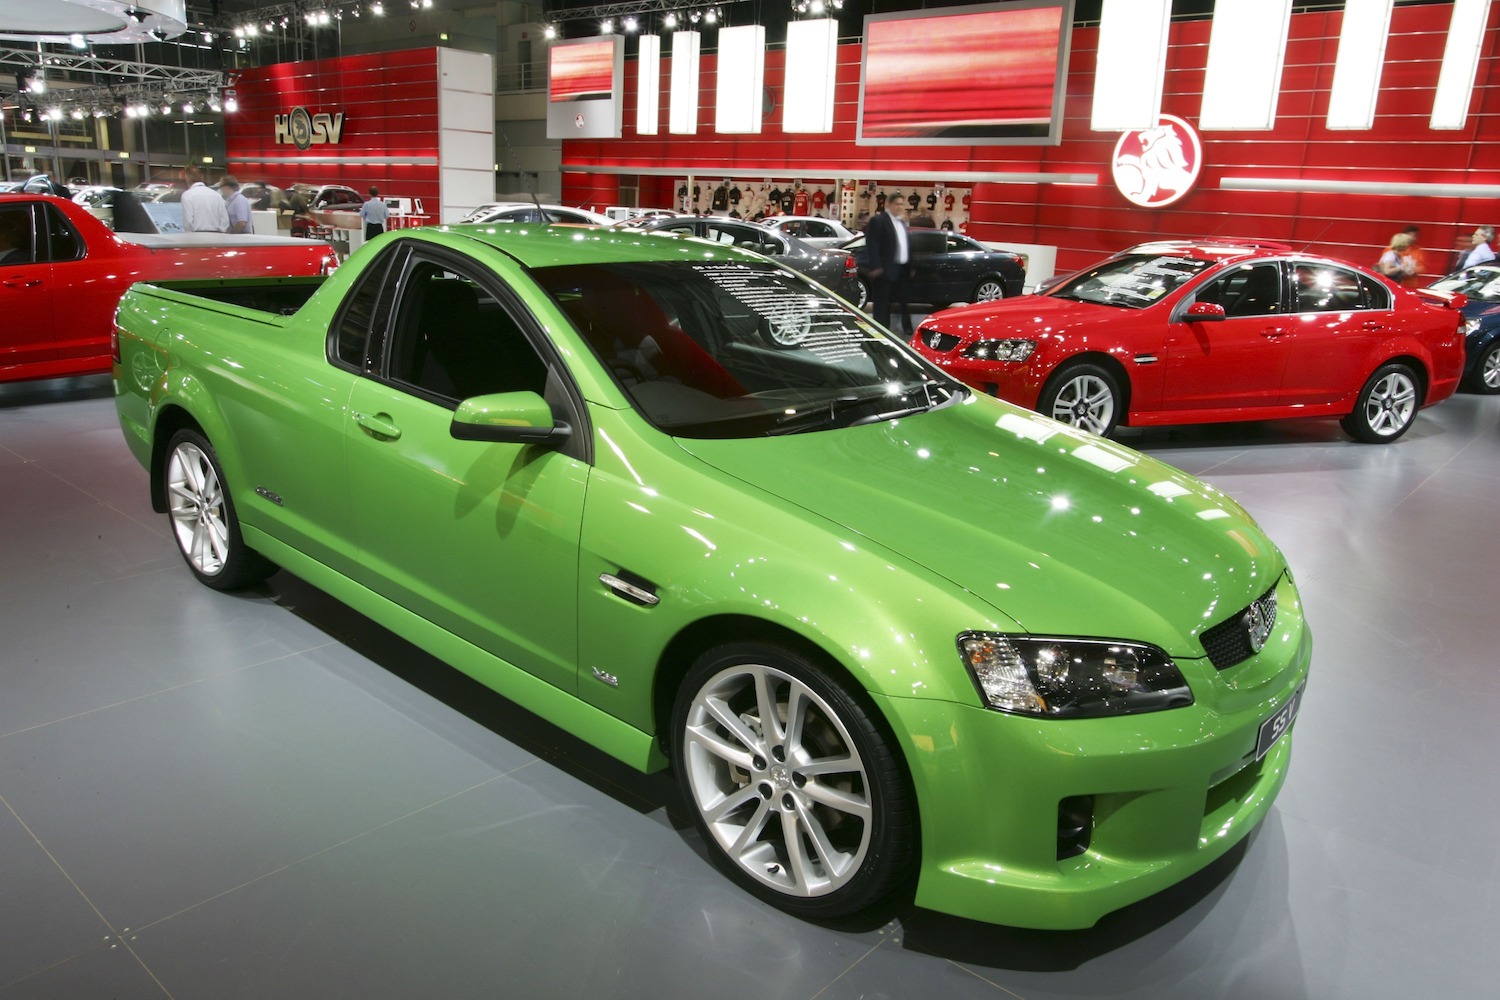 Bright green special edition of Holden's Ute compact coupe utility van parked at the Australian motor show.